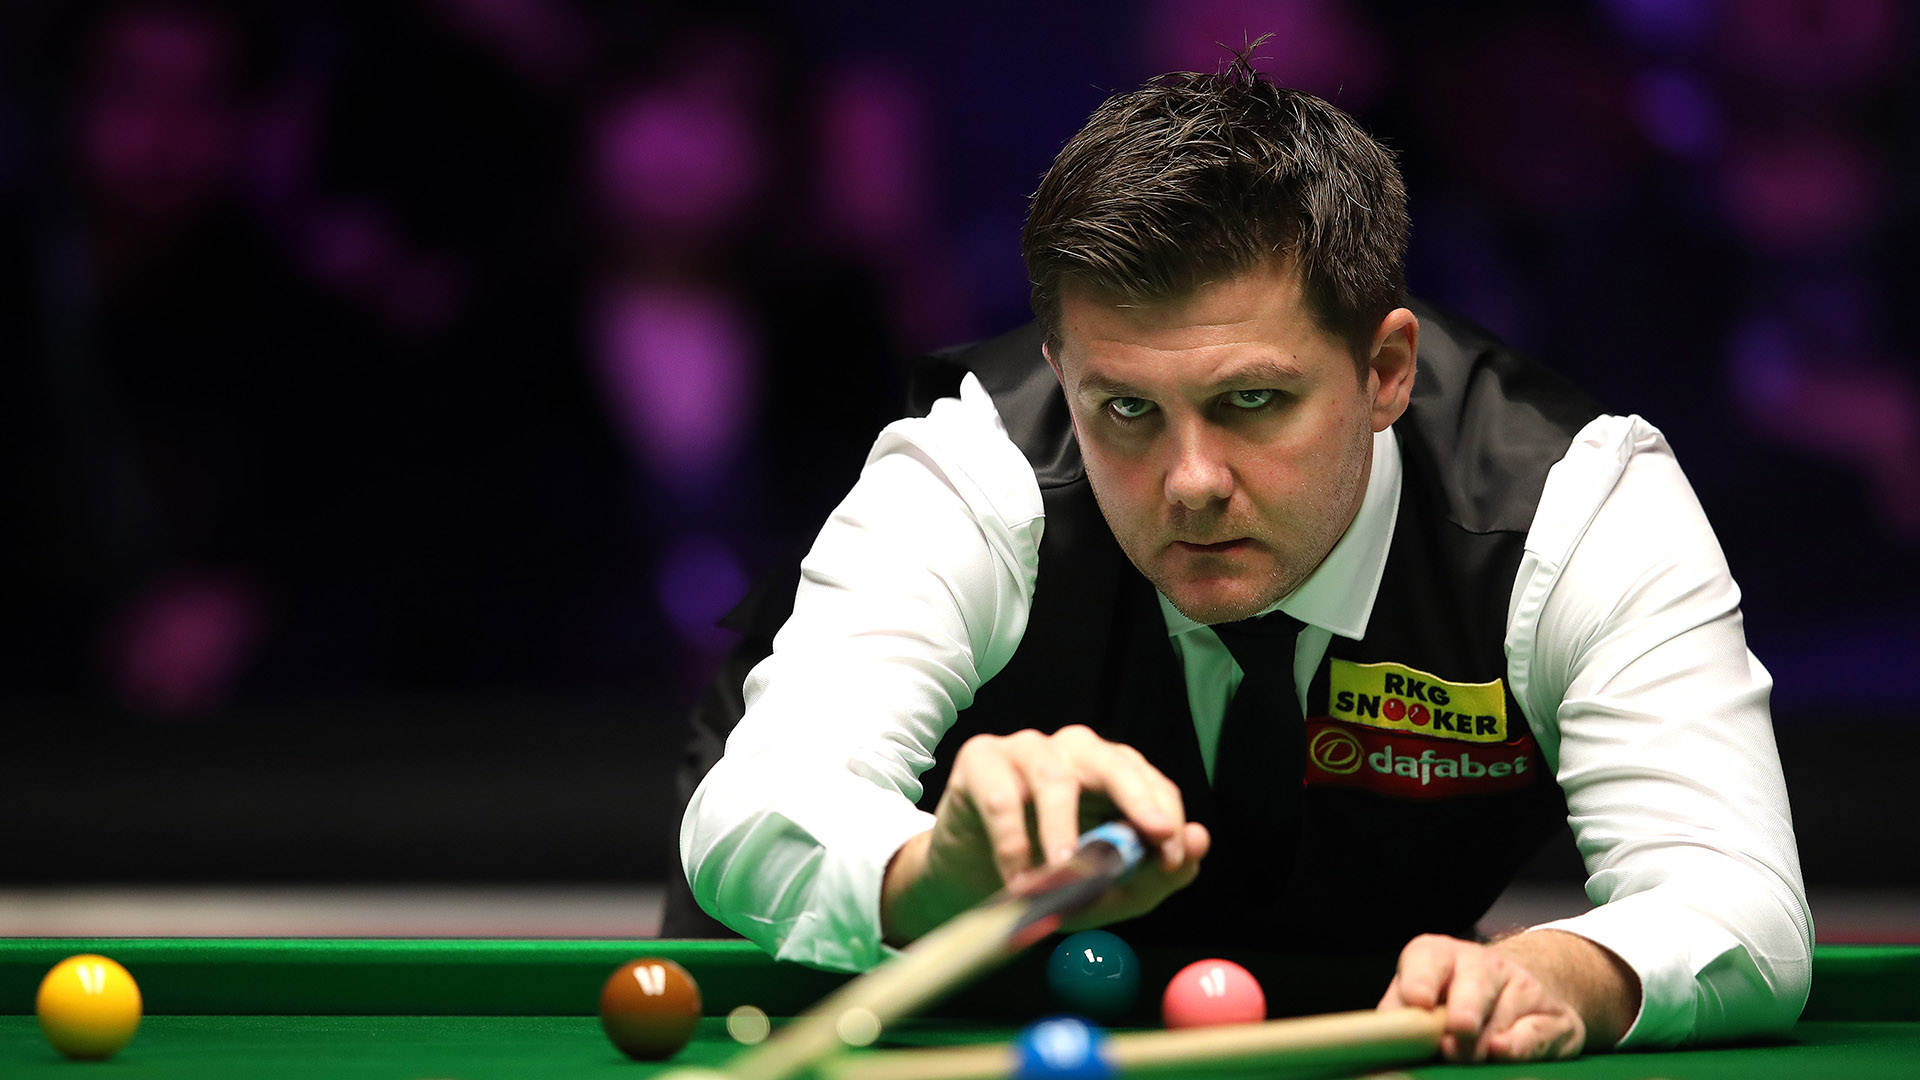 Snooker results Ryan Day stuns Mark Allen to win the British Open title